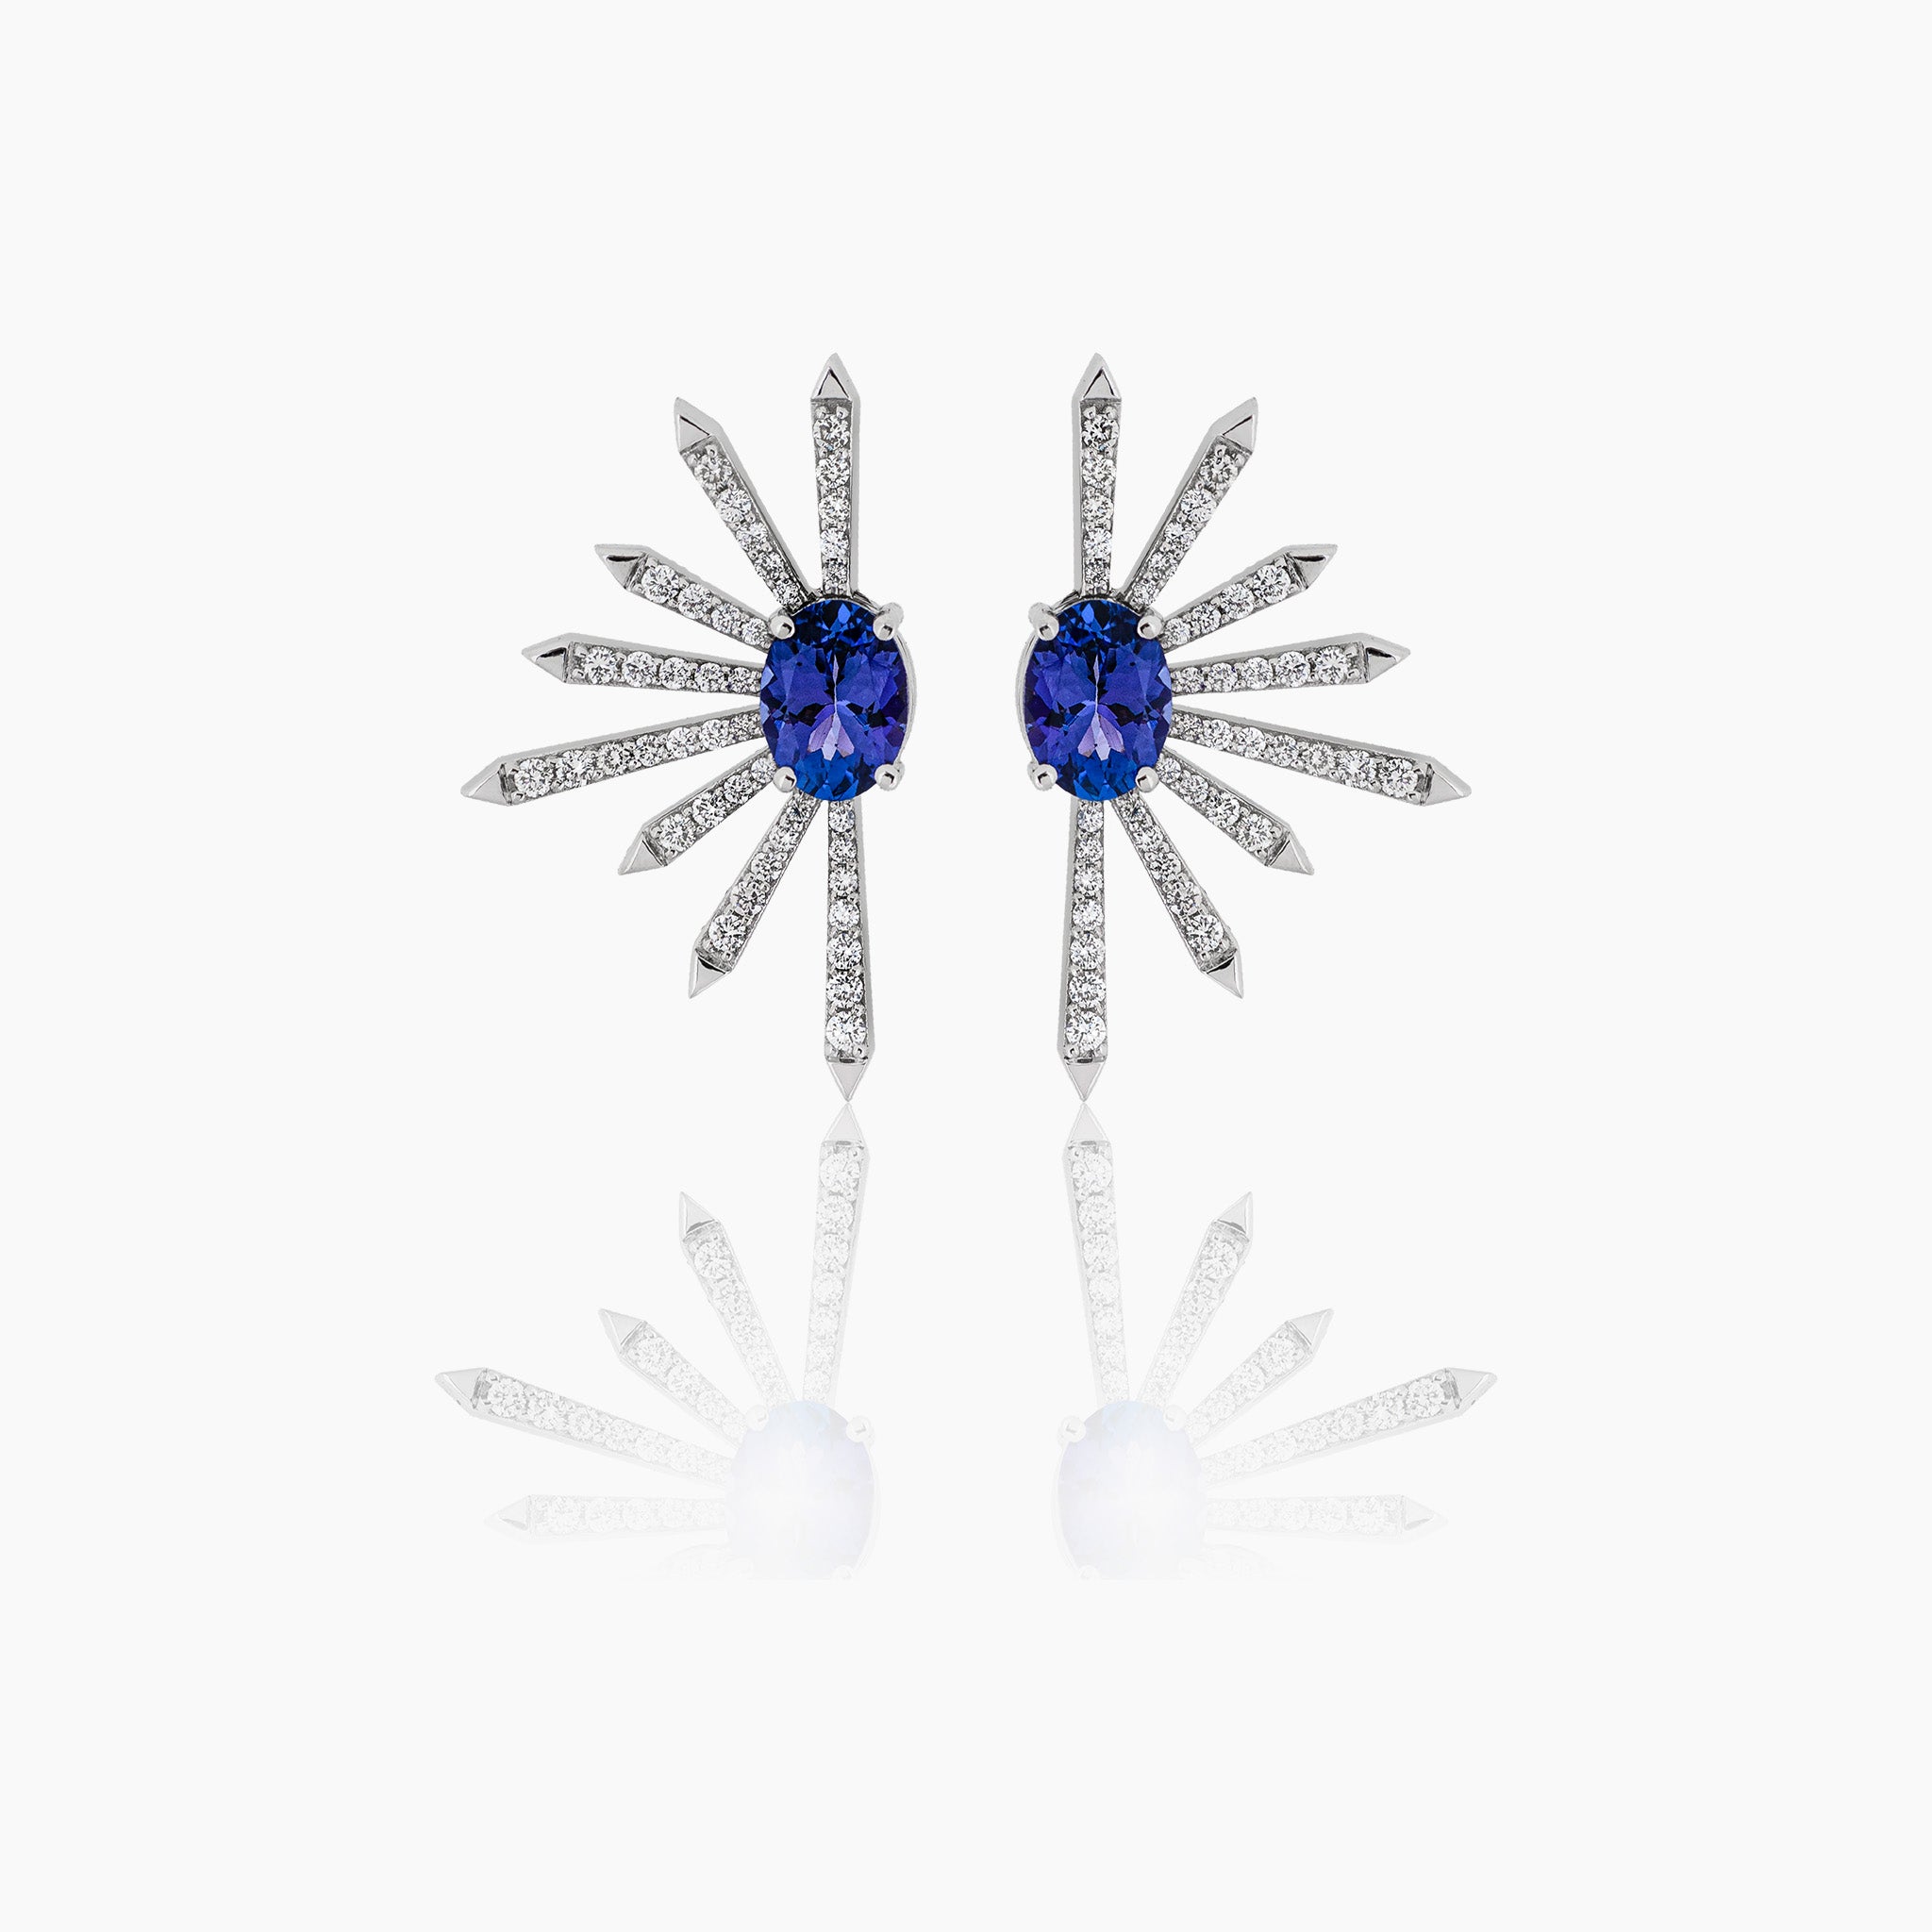 Diamond earrings with two elegant tanzanite ovals,  on an off-white background.